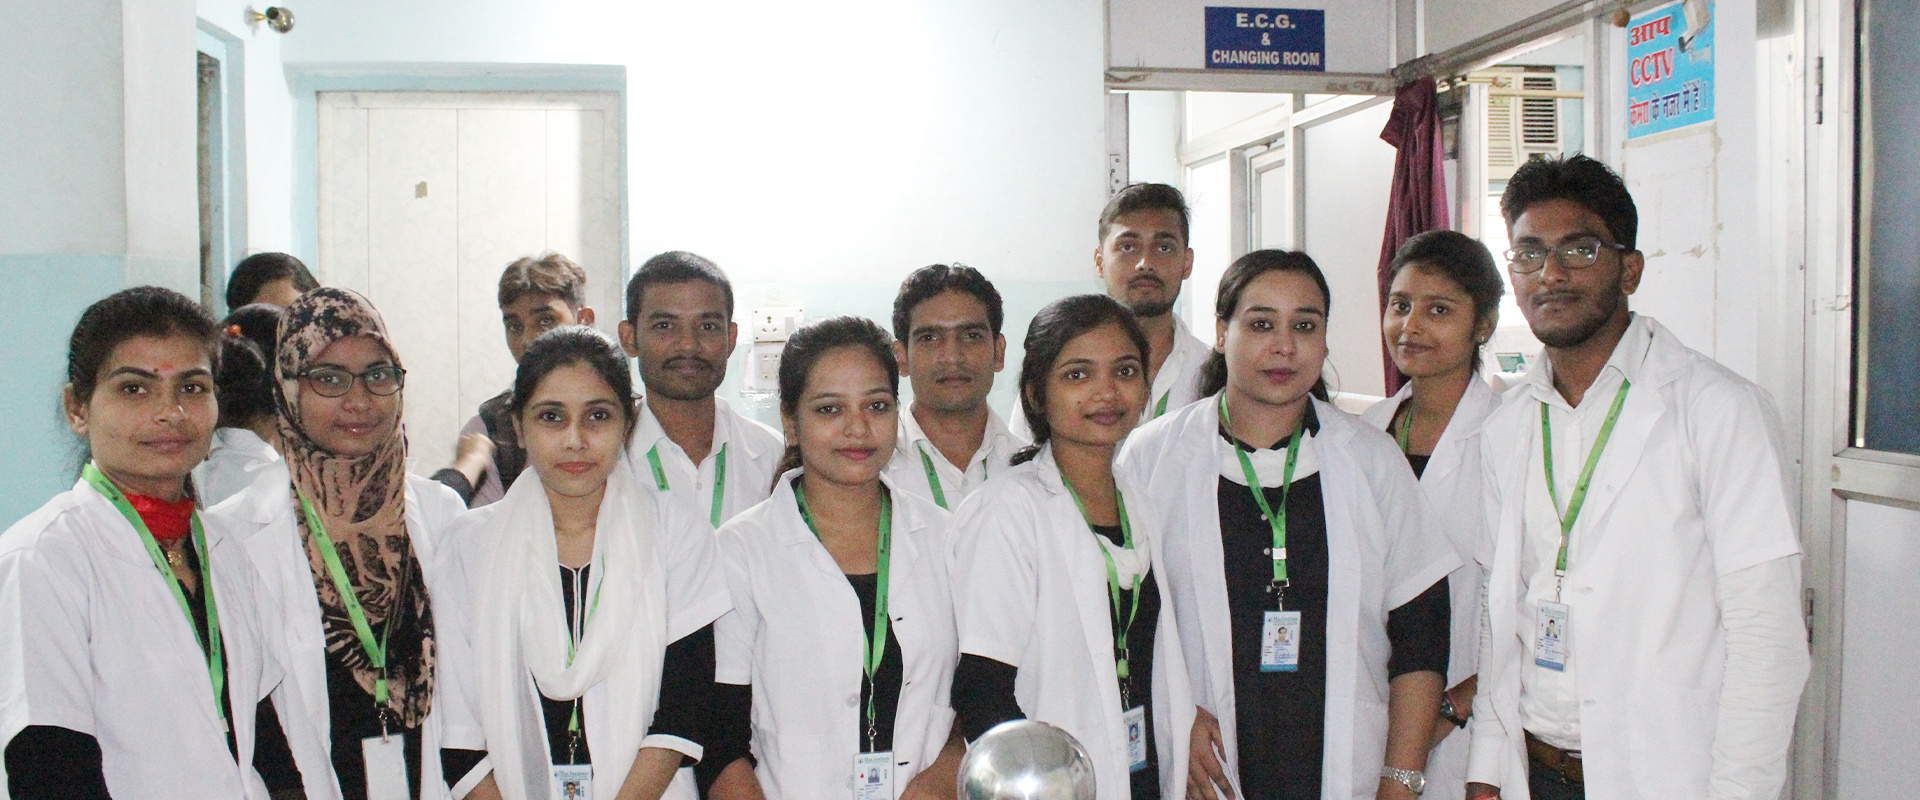 operation theatre assistant in patna, 
become an operation theatre assistant in patna, operation theatre assistant